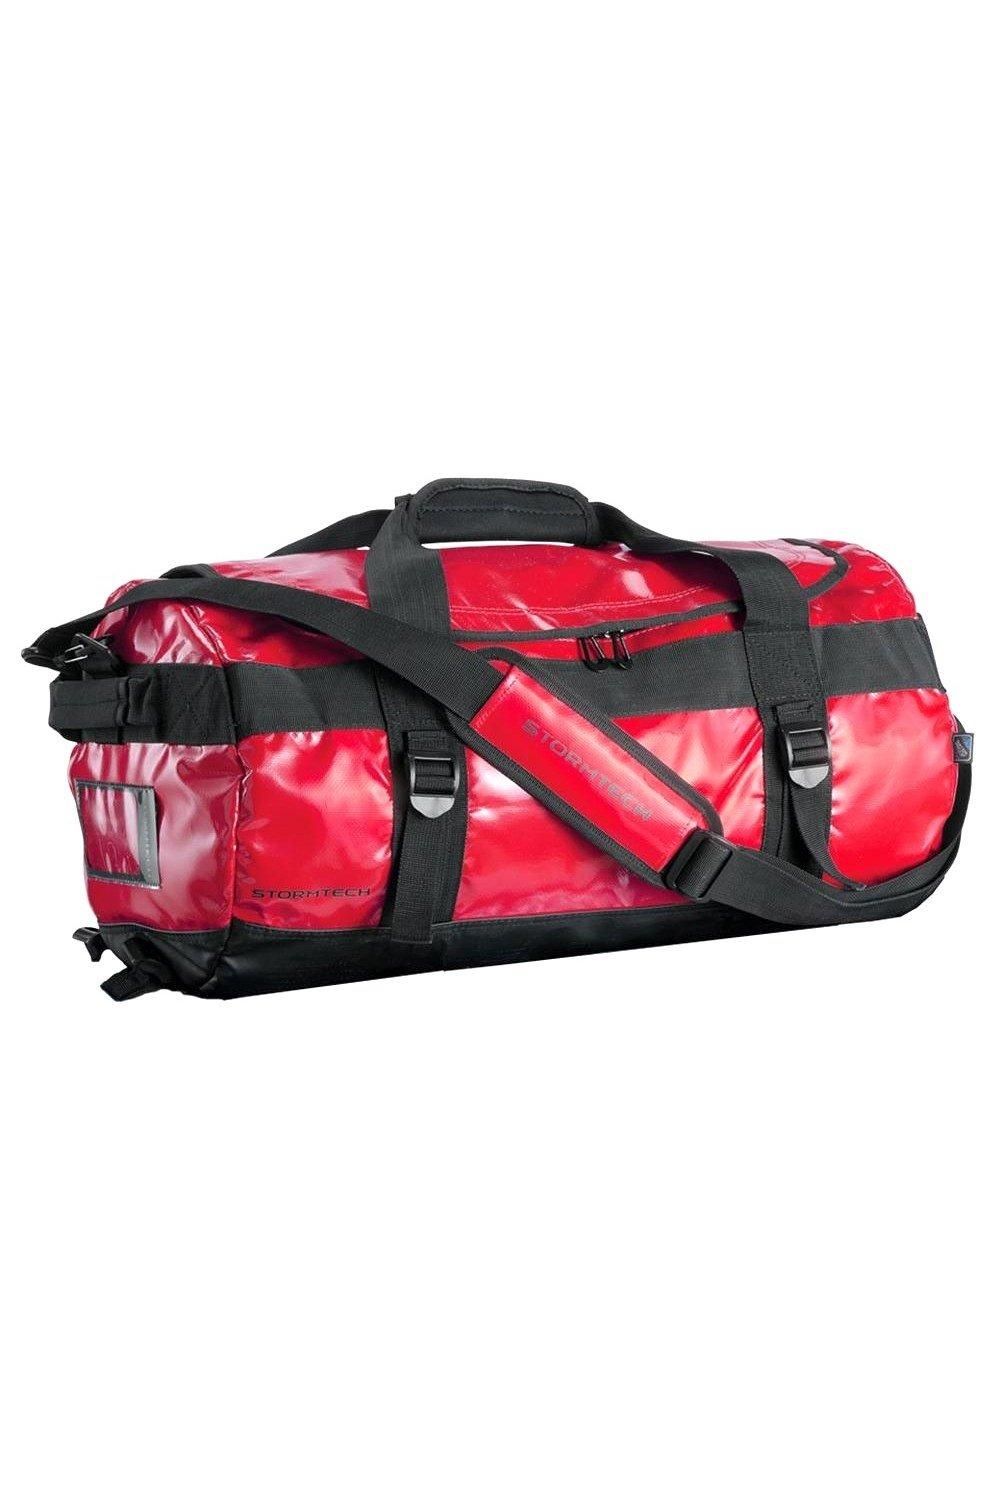 Waterproof Gear Holdall Bag (Small) Pack of 2